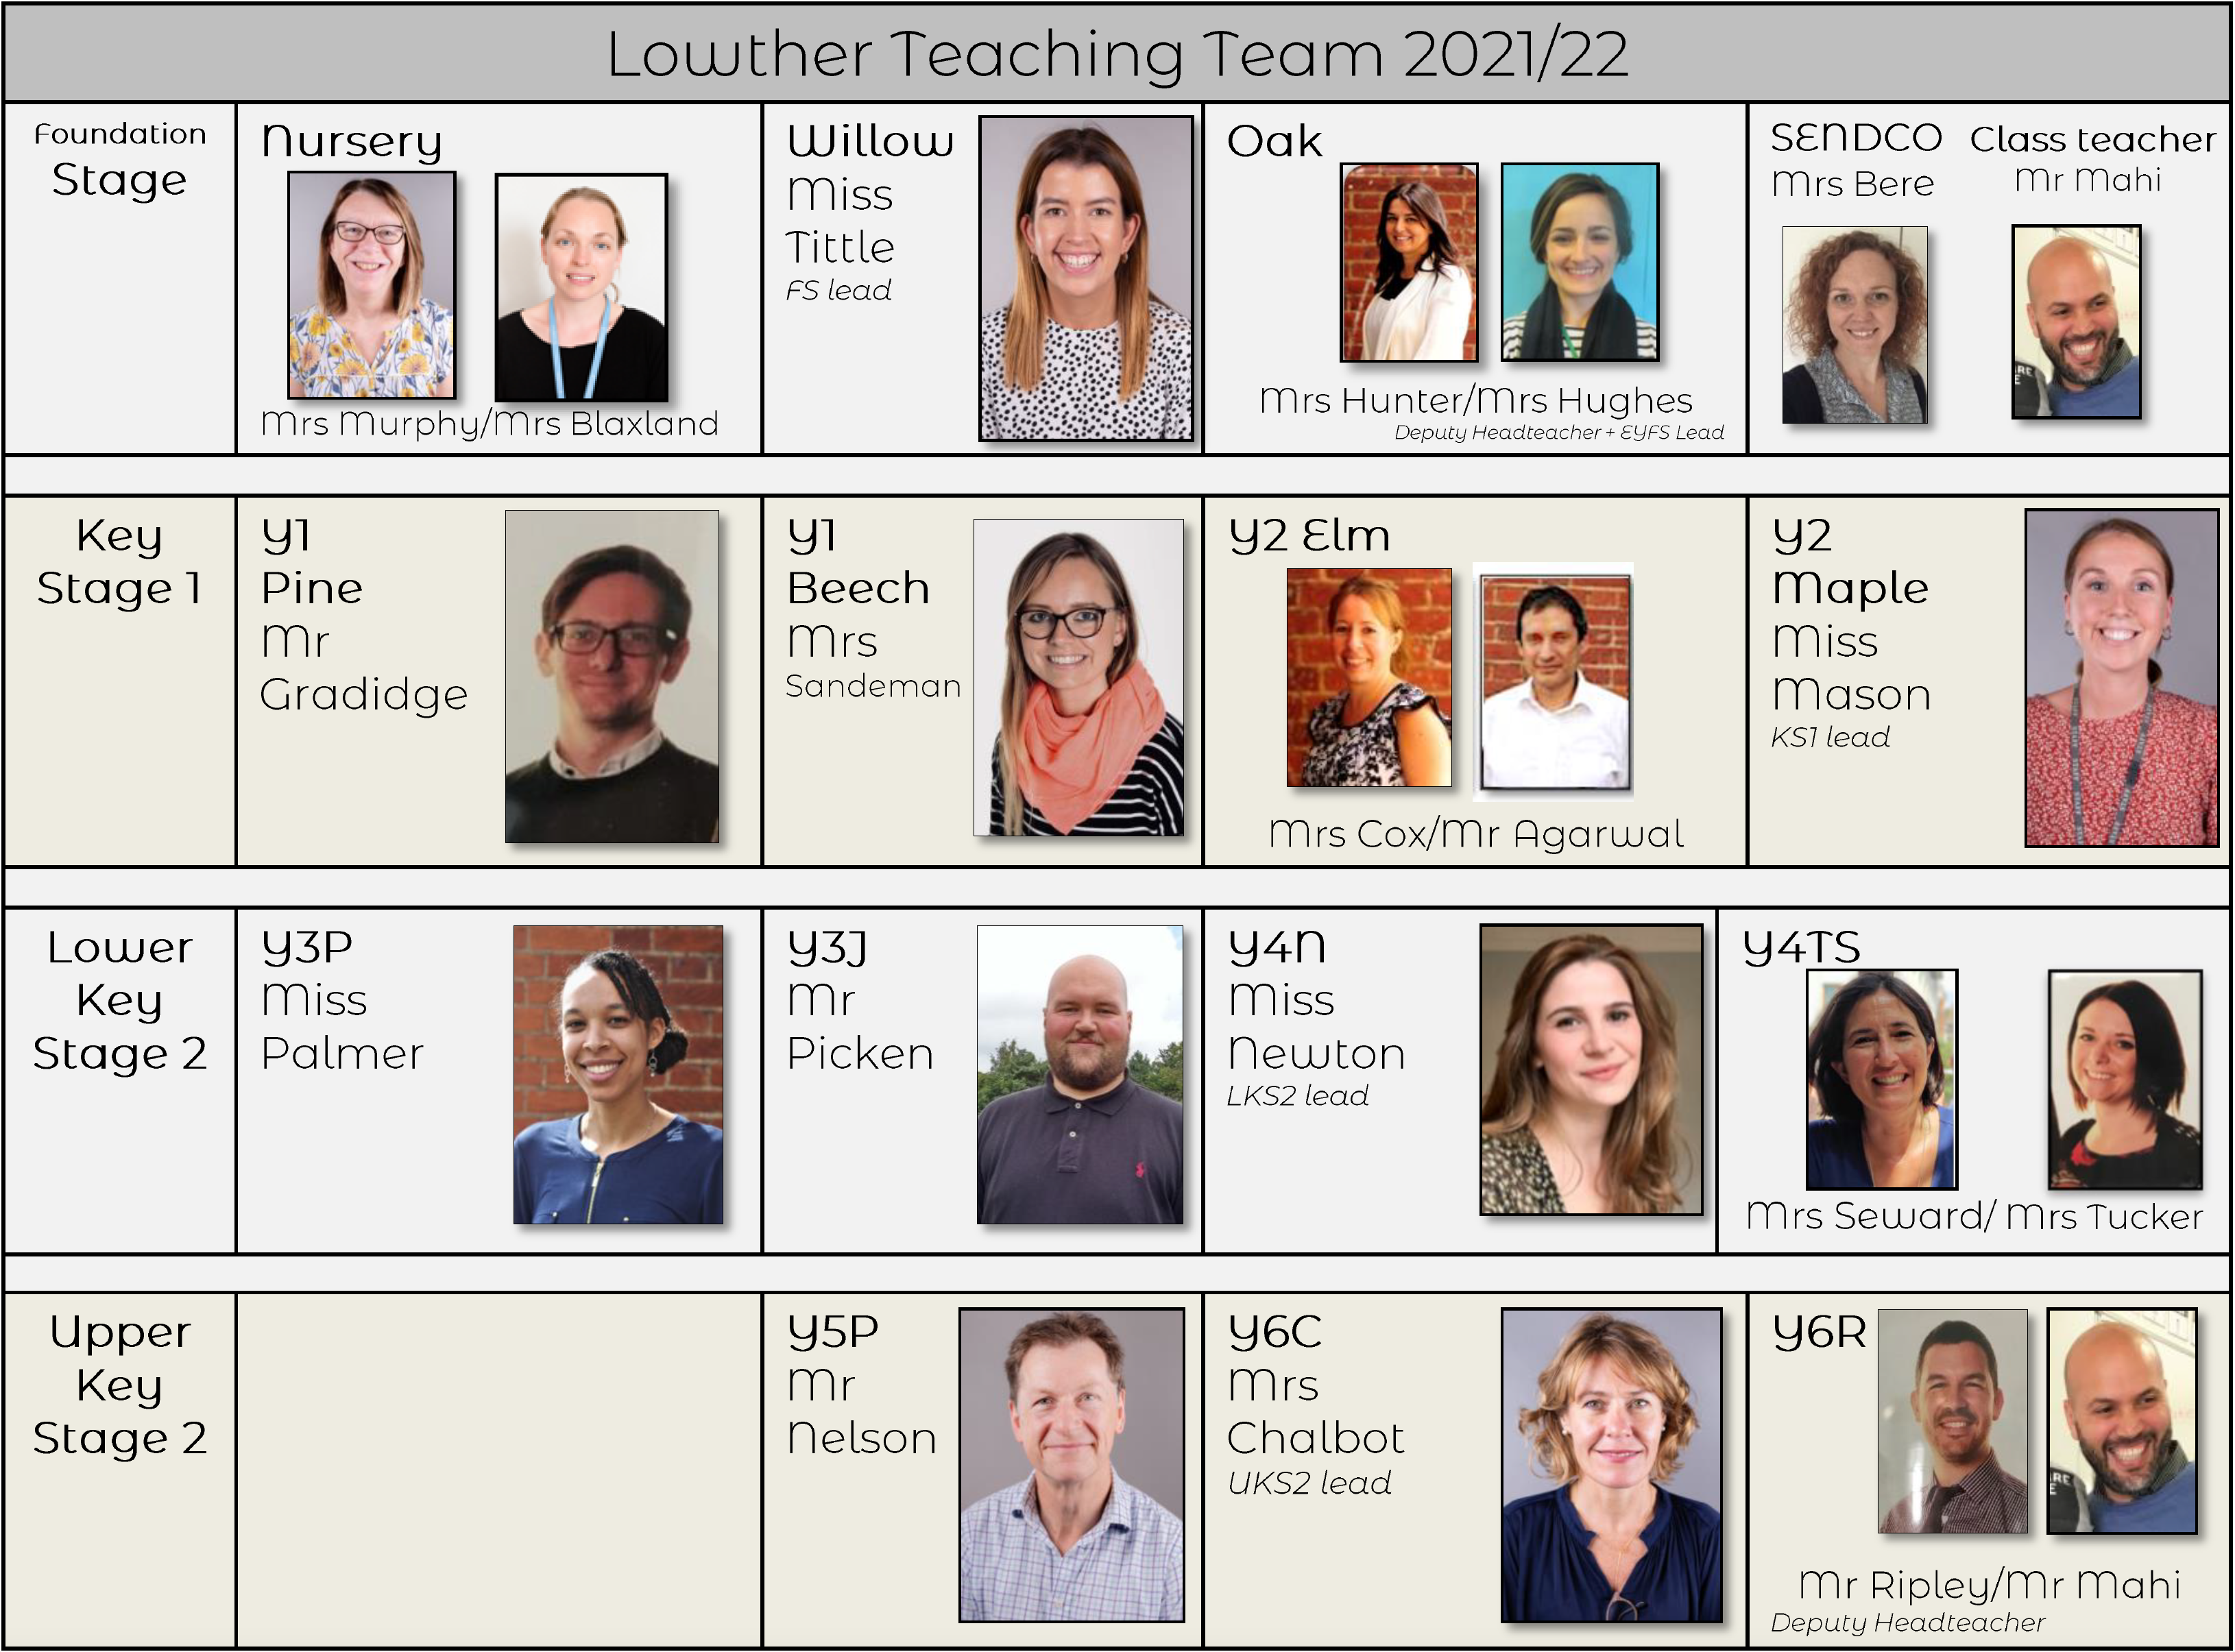 Lowther Teaching Team 2020/21 chart